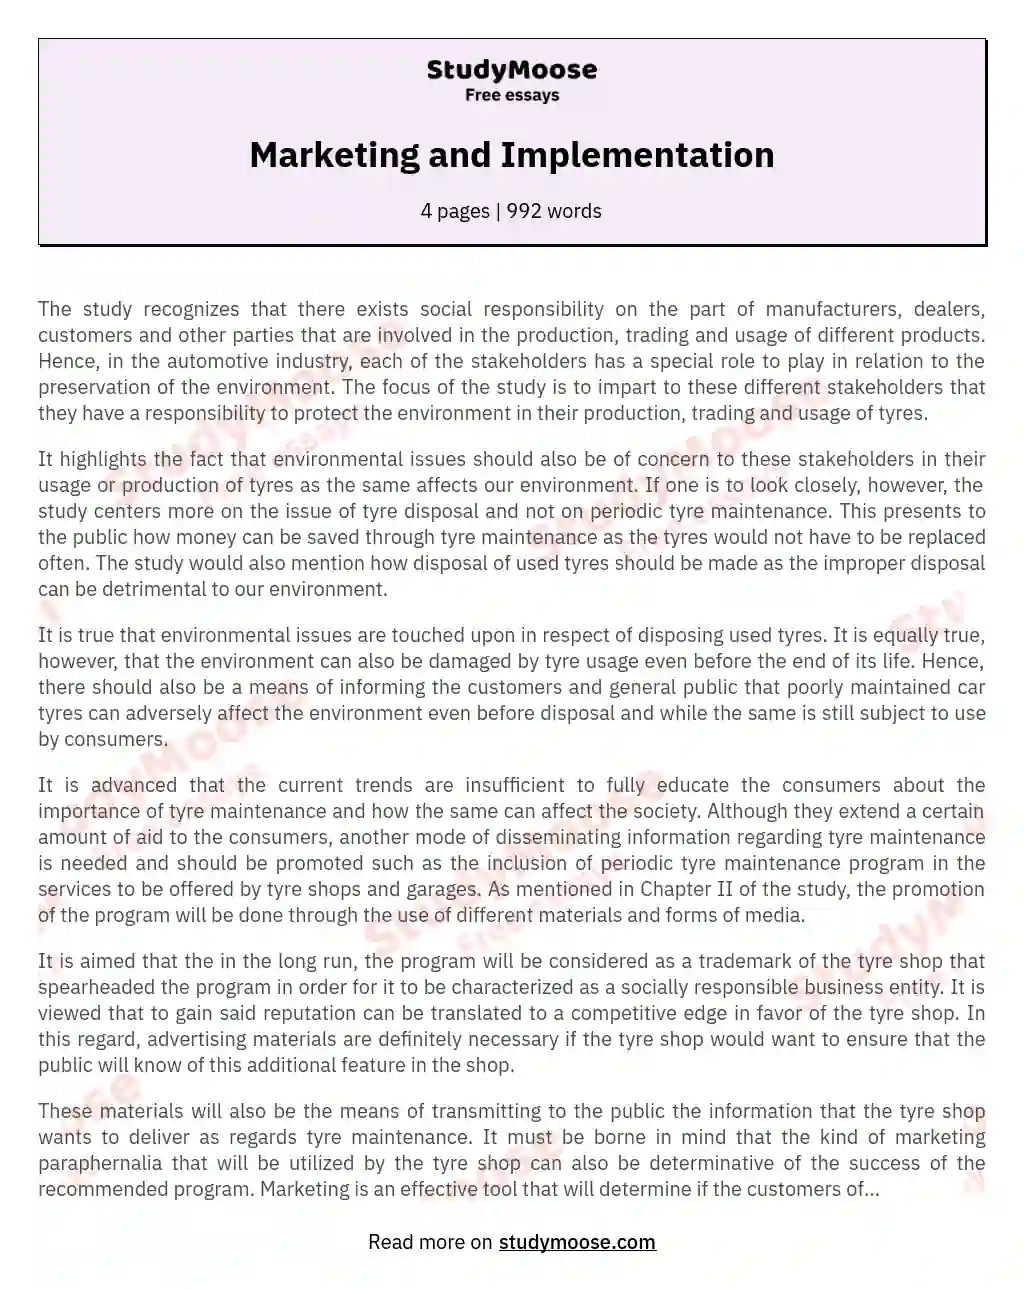 Marketing and Implementation essay